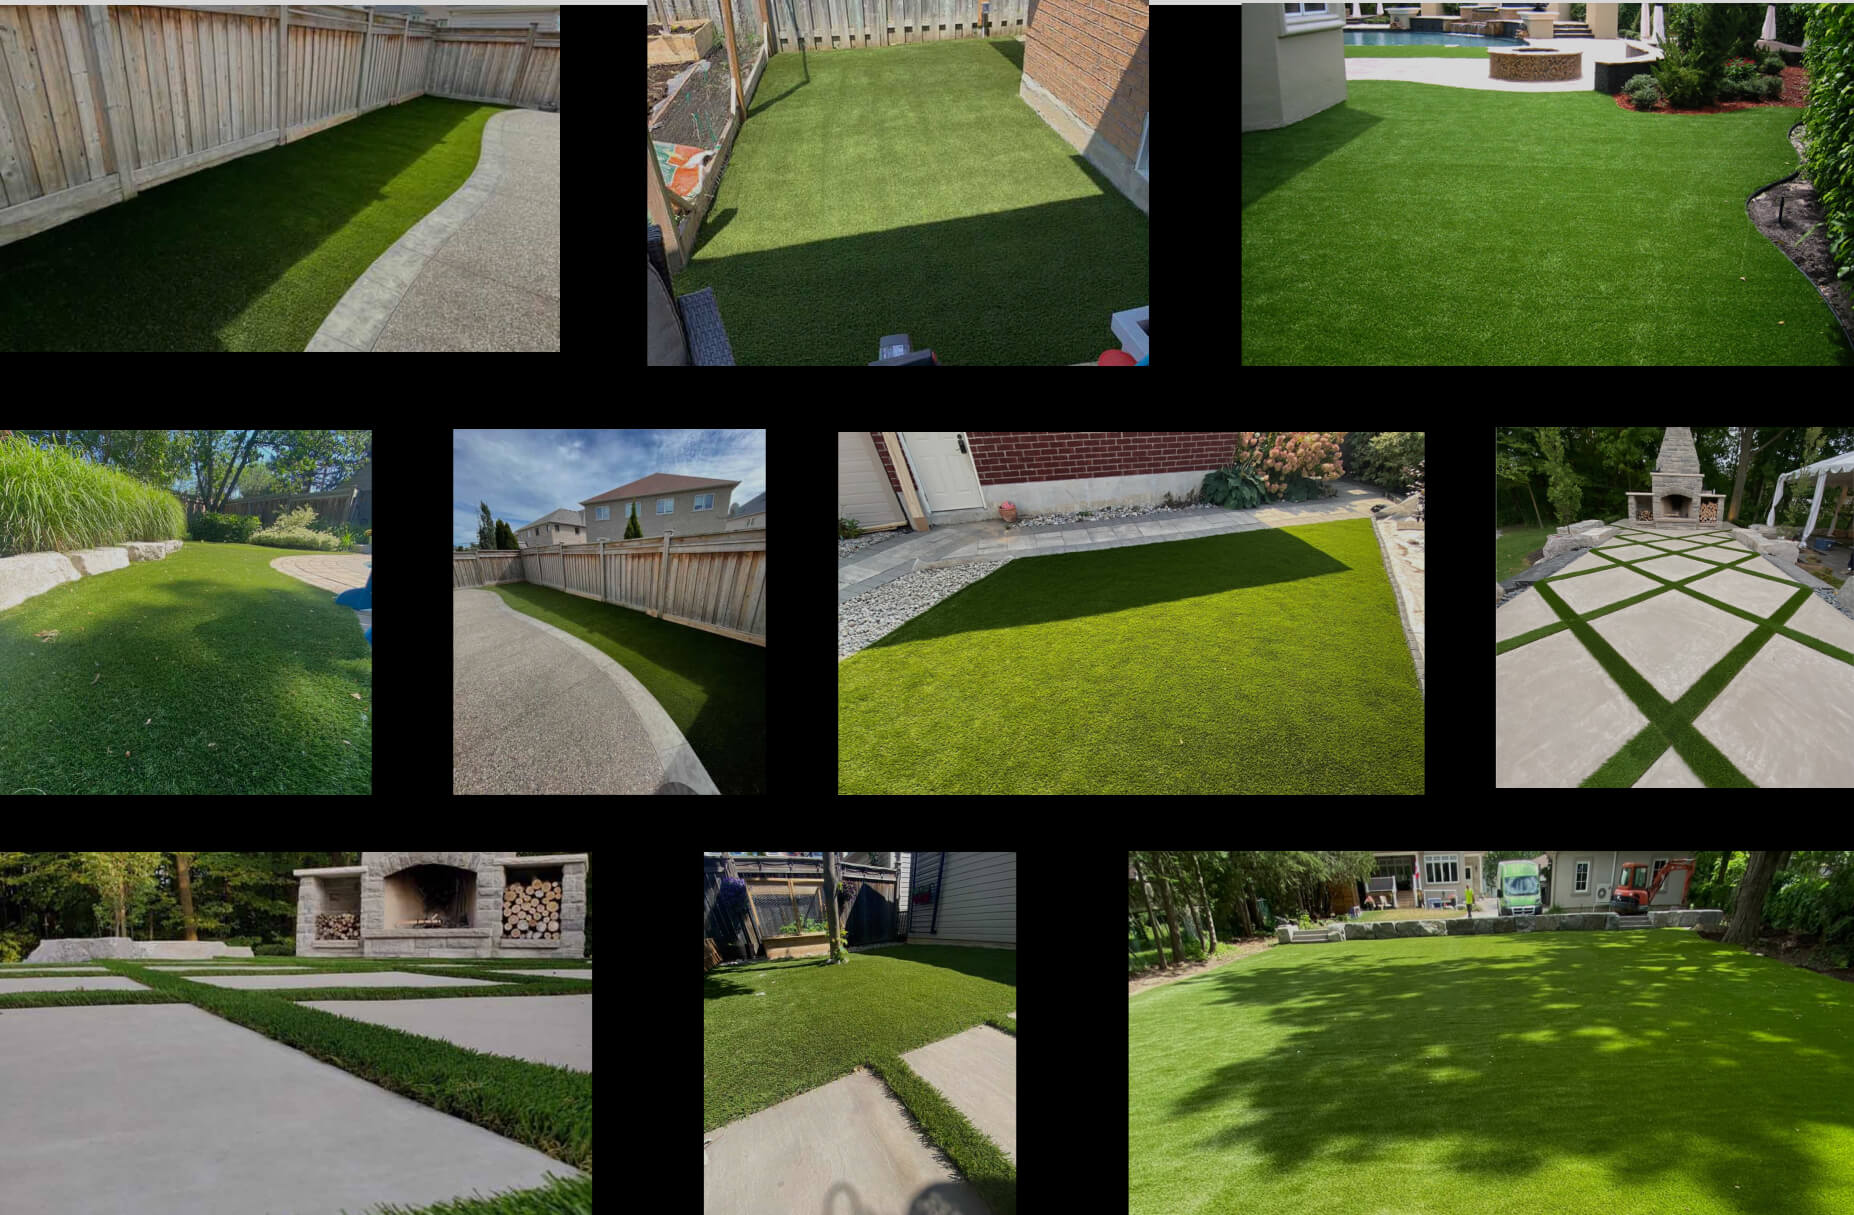 Upgrade Your Front & Backyard with <span style="color: #0AE294;font-weight: bold">Artificial Turf </span>